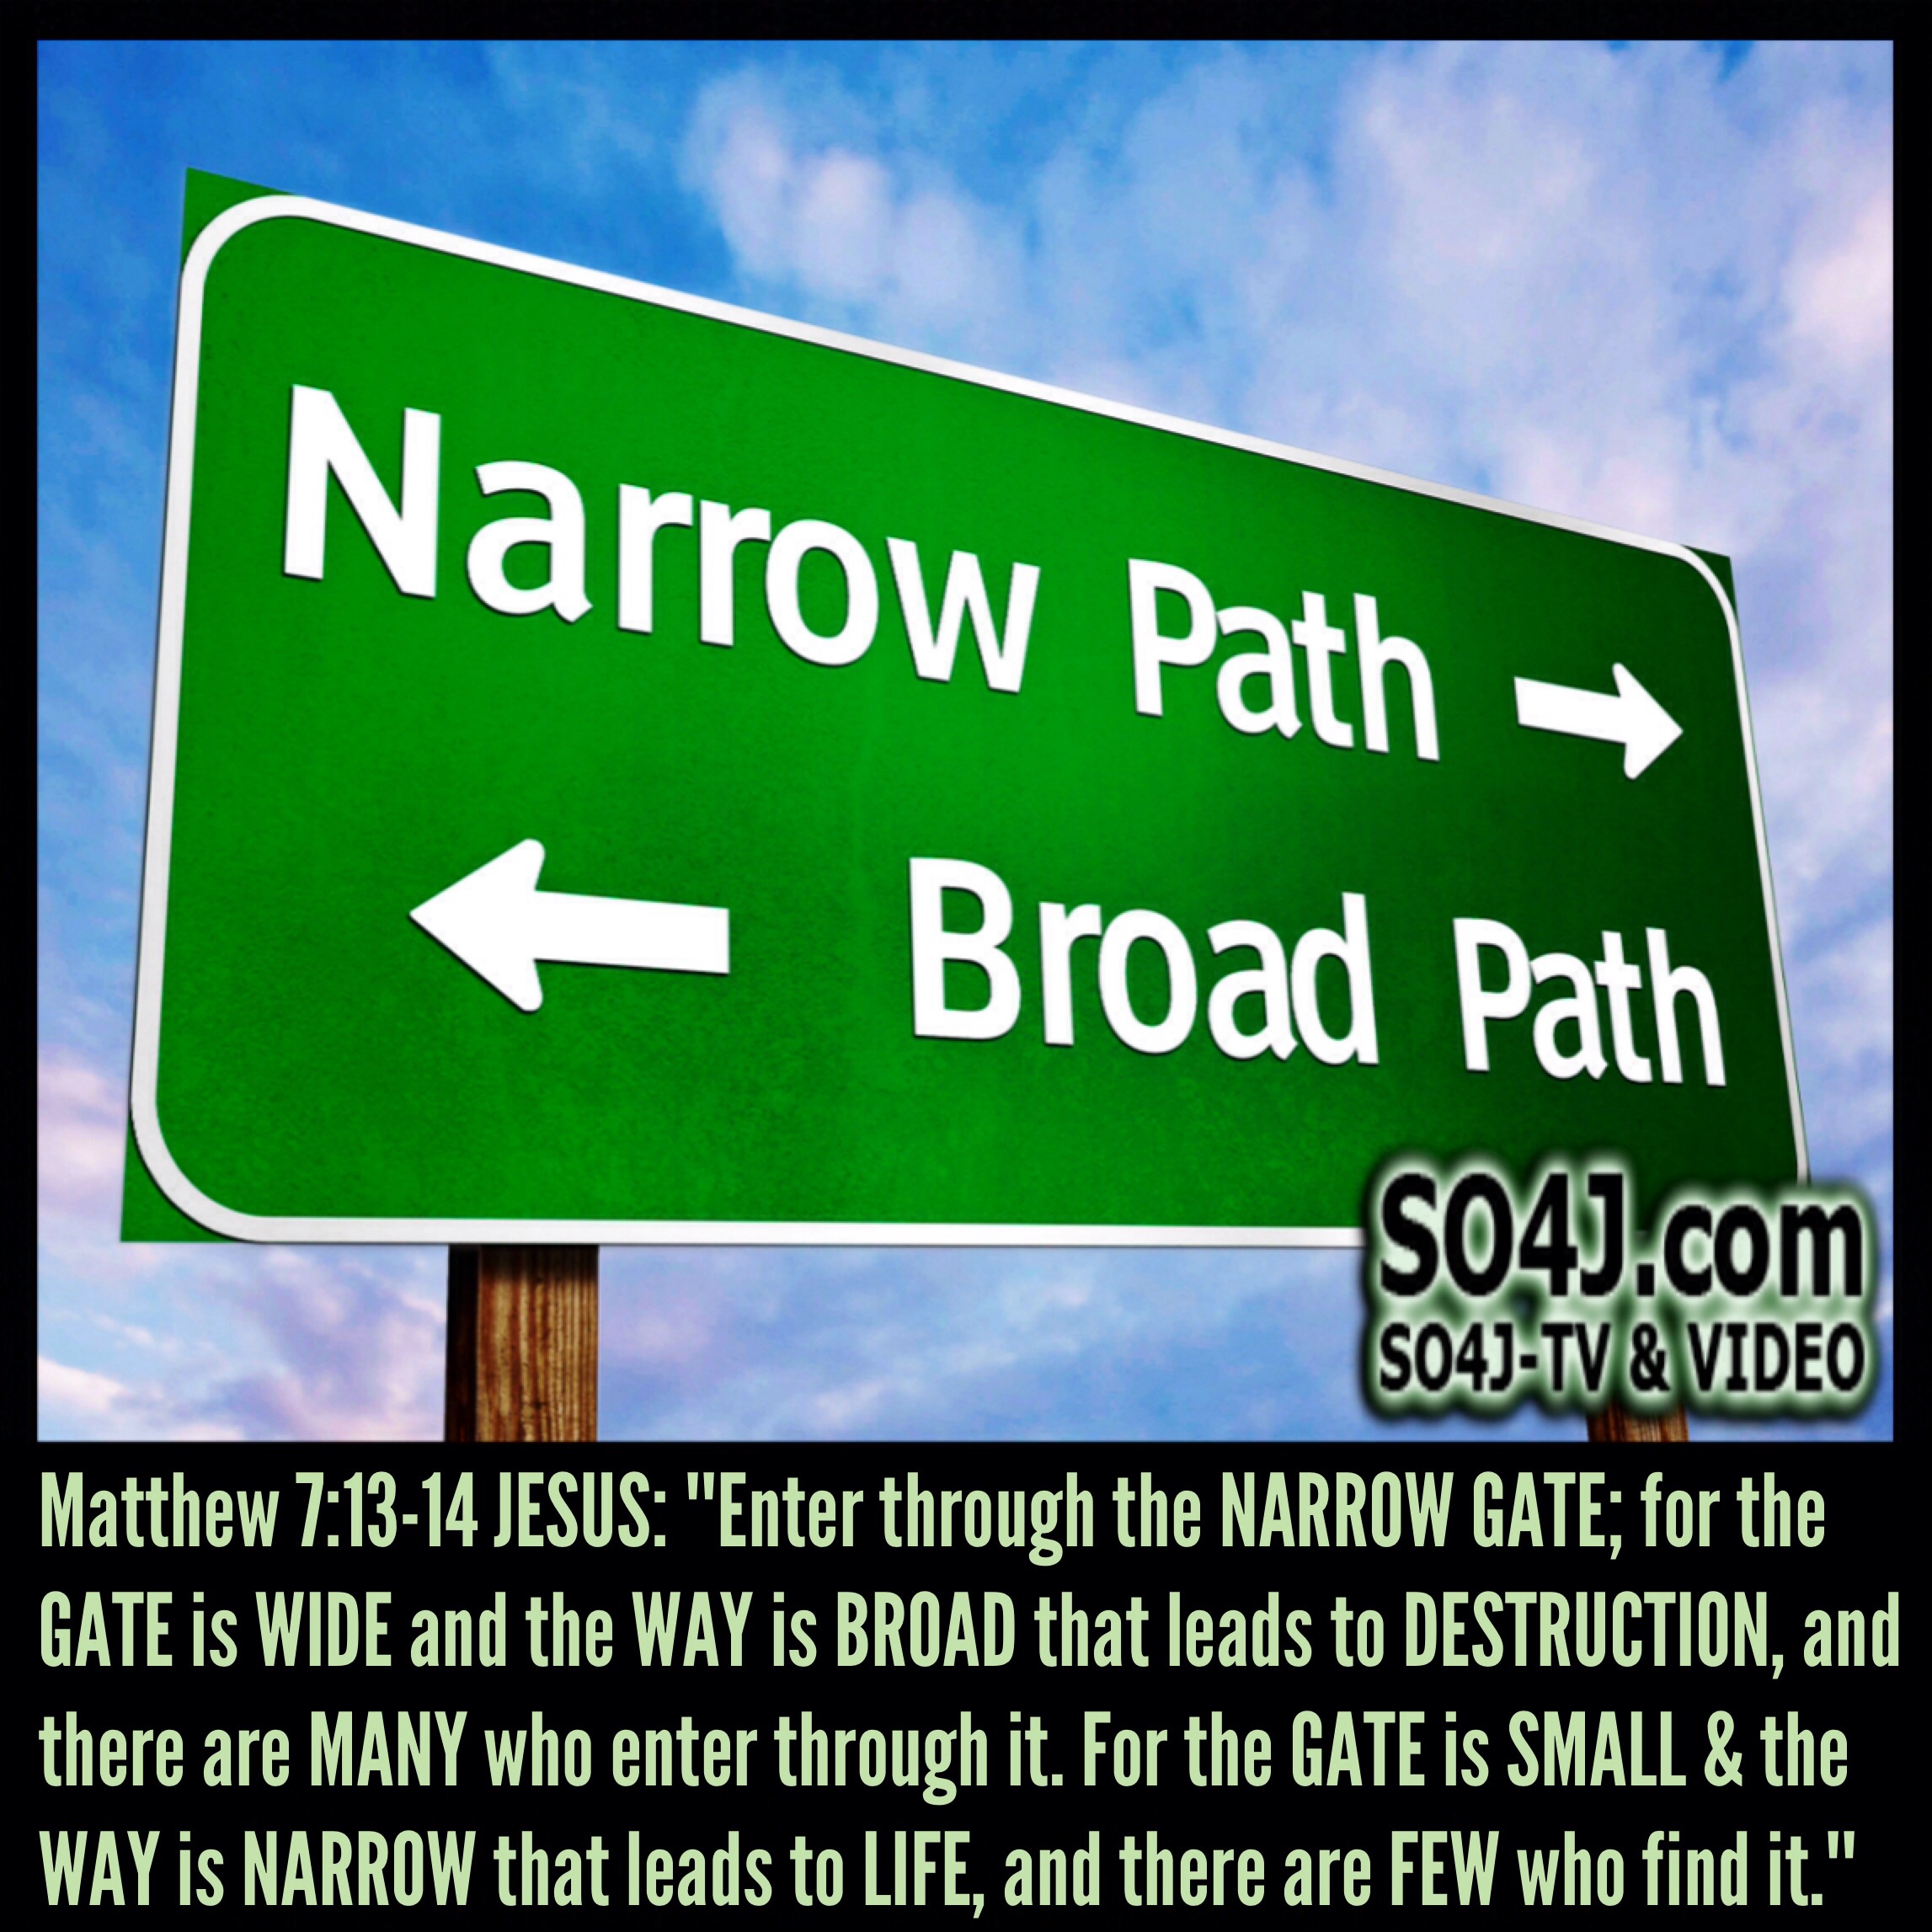 Narrow Path or Broad Path - Matthew 7:13-14 (NASB) JESUS— "Enter through the NARROW GATE; for the GATE is WIDE and the WAY is BROAD that leads to DESTRUCTION, and there are MANY who enter through it. For the GATE is SMALL & the WAY is NARROW that leads to LIFE, and there are FEW who find it.”